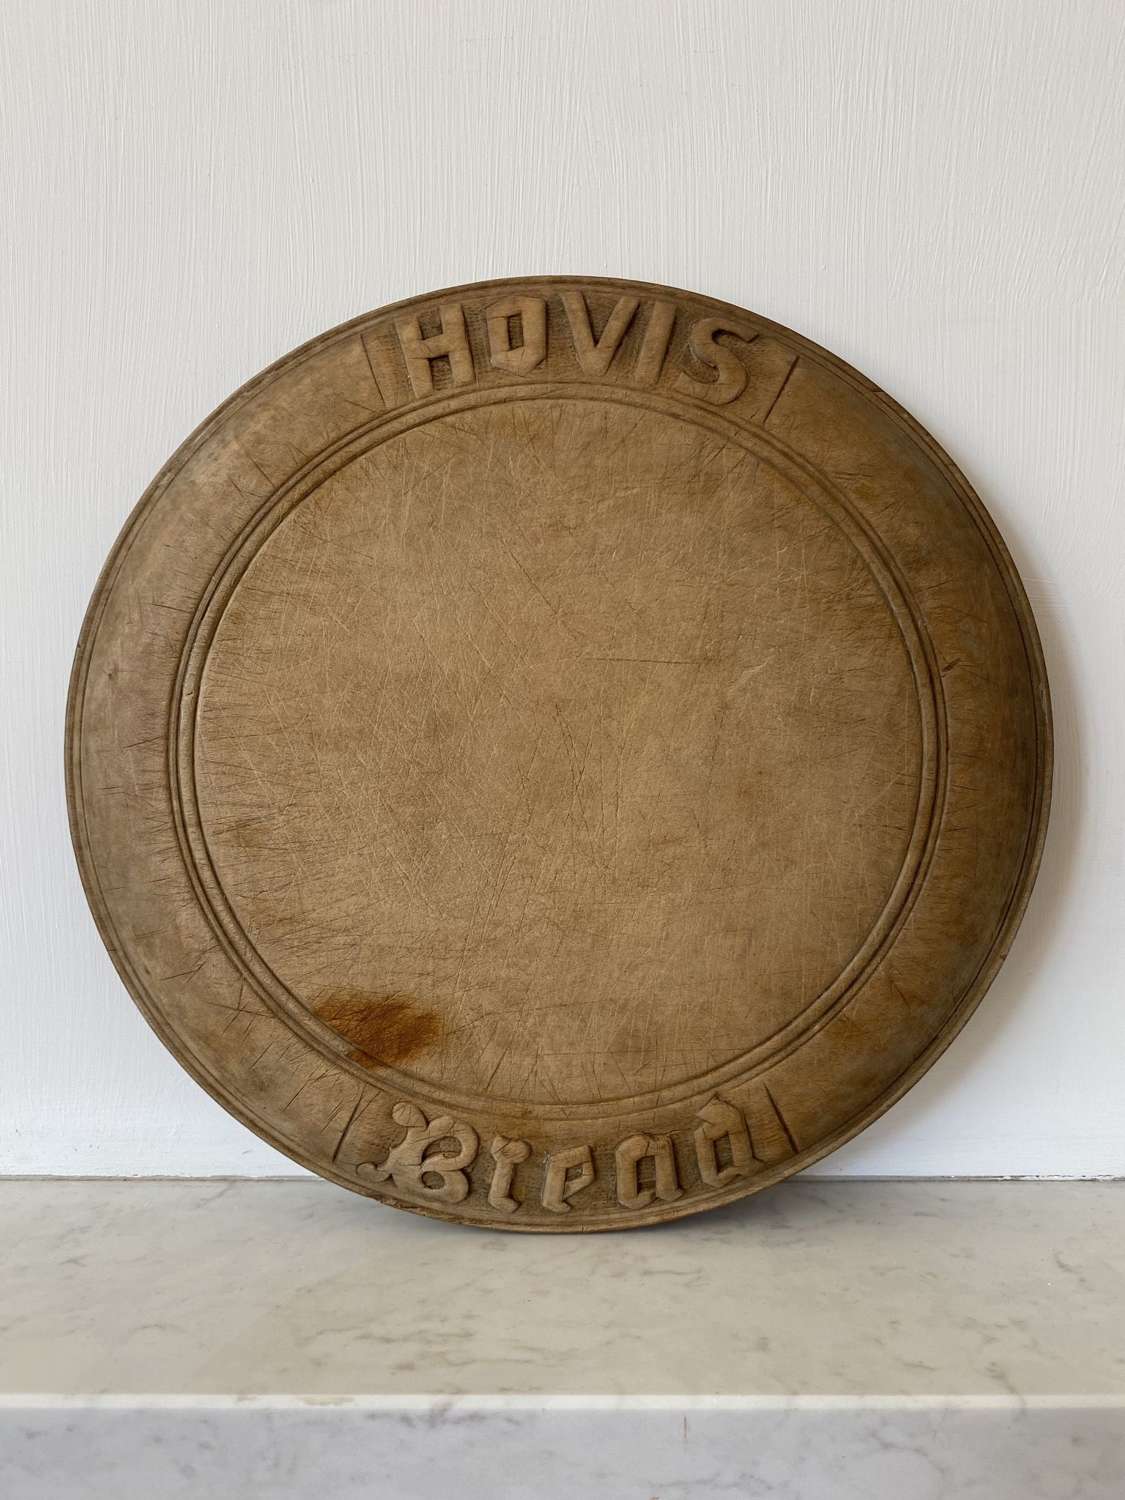 Early 20th Century Carved Advertising Bread Board - Hovis